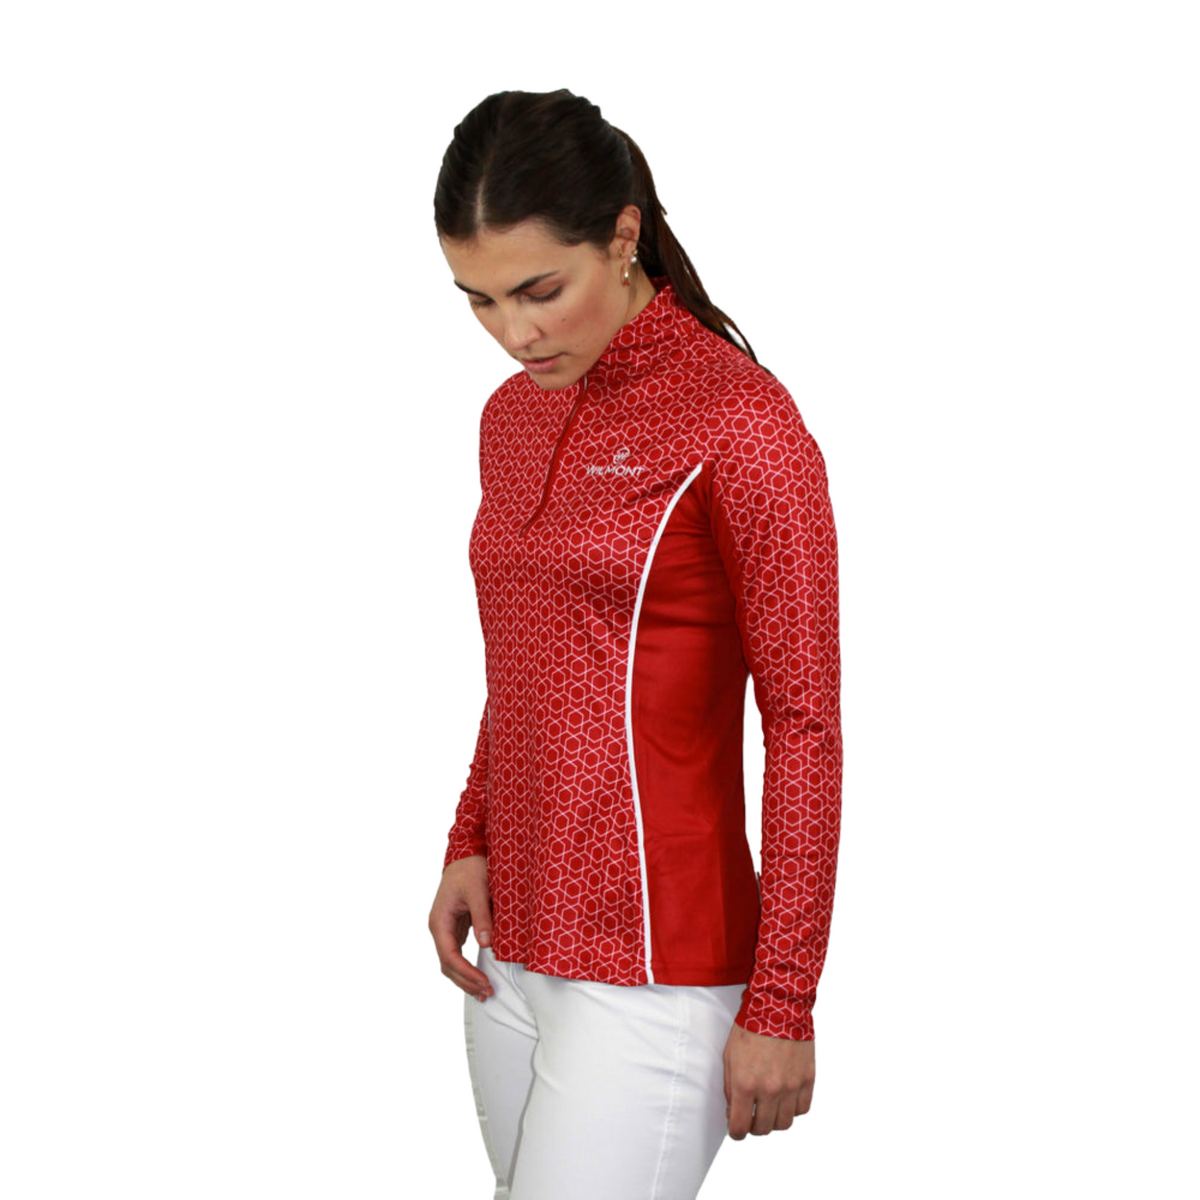 Lady modelling red long sleeve with geometric patterns.